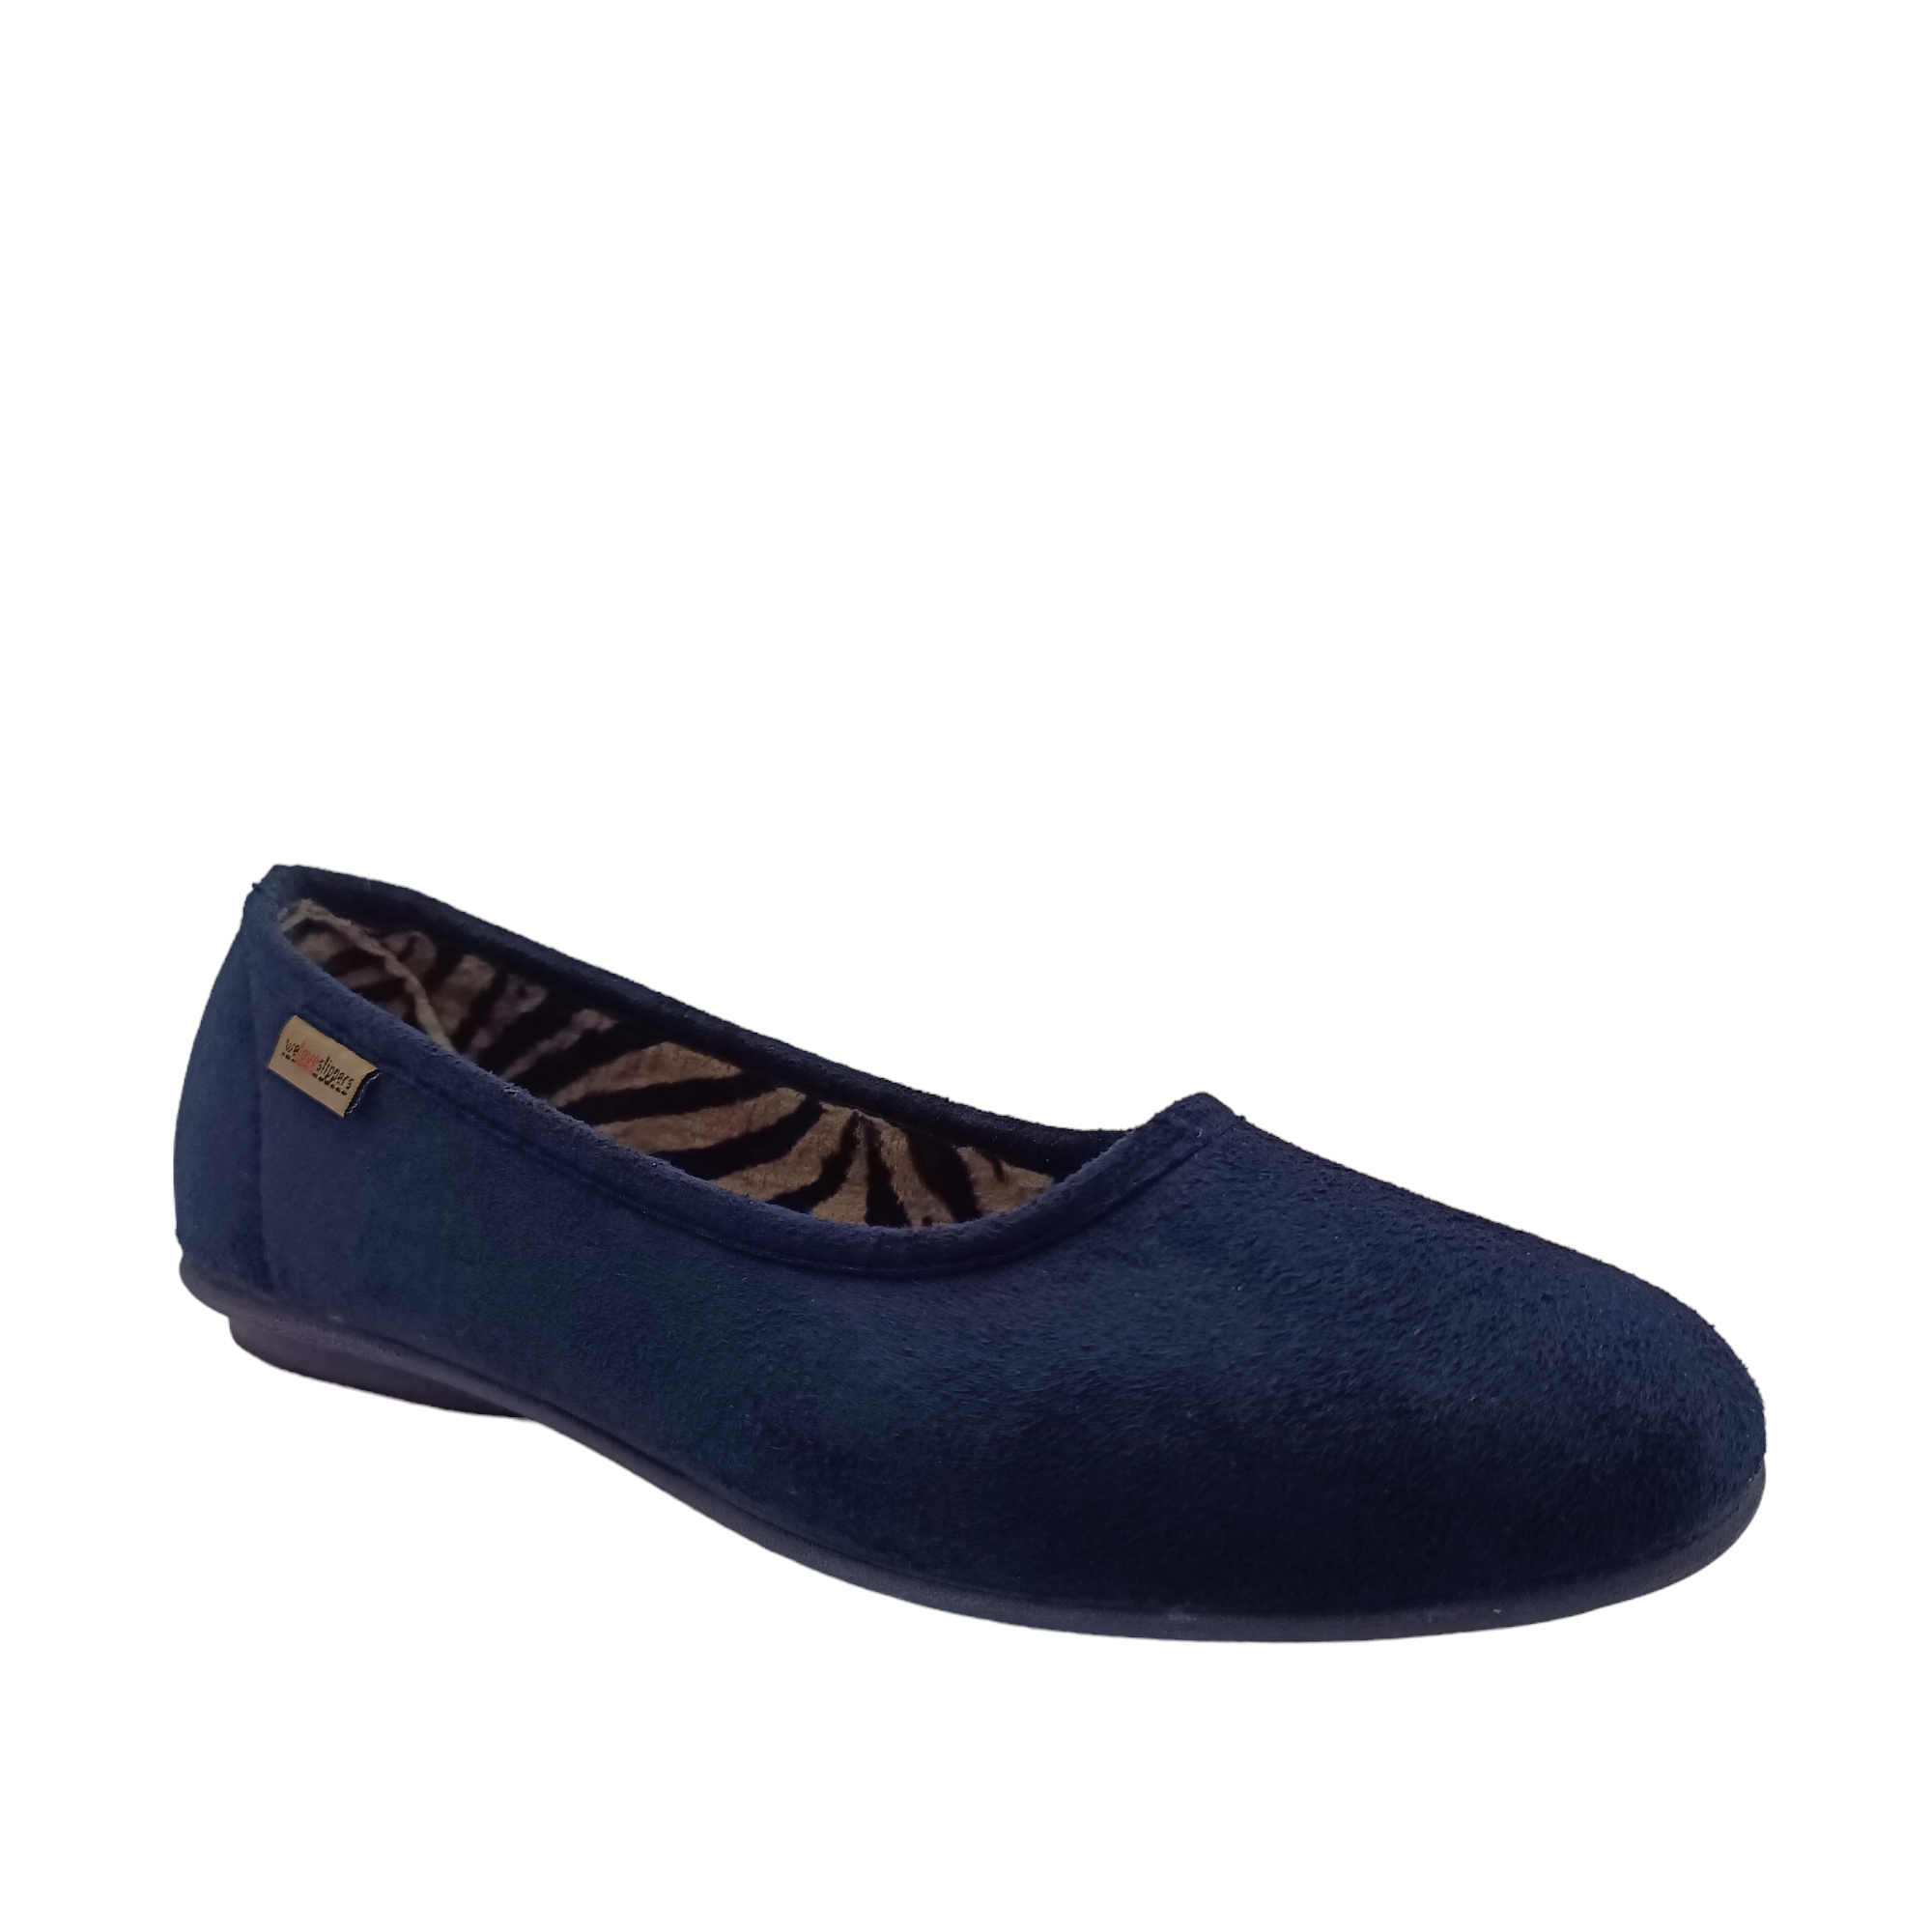 Front view of navy Nuzzle Slippers with leopard print lining. Shop Womens Slippers and Shoes Online and In-store with shoe&amp;me.